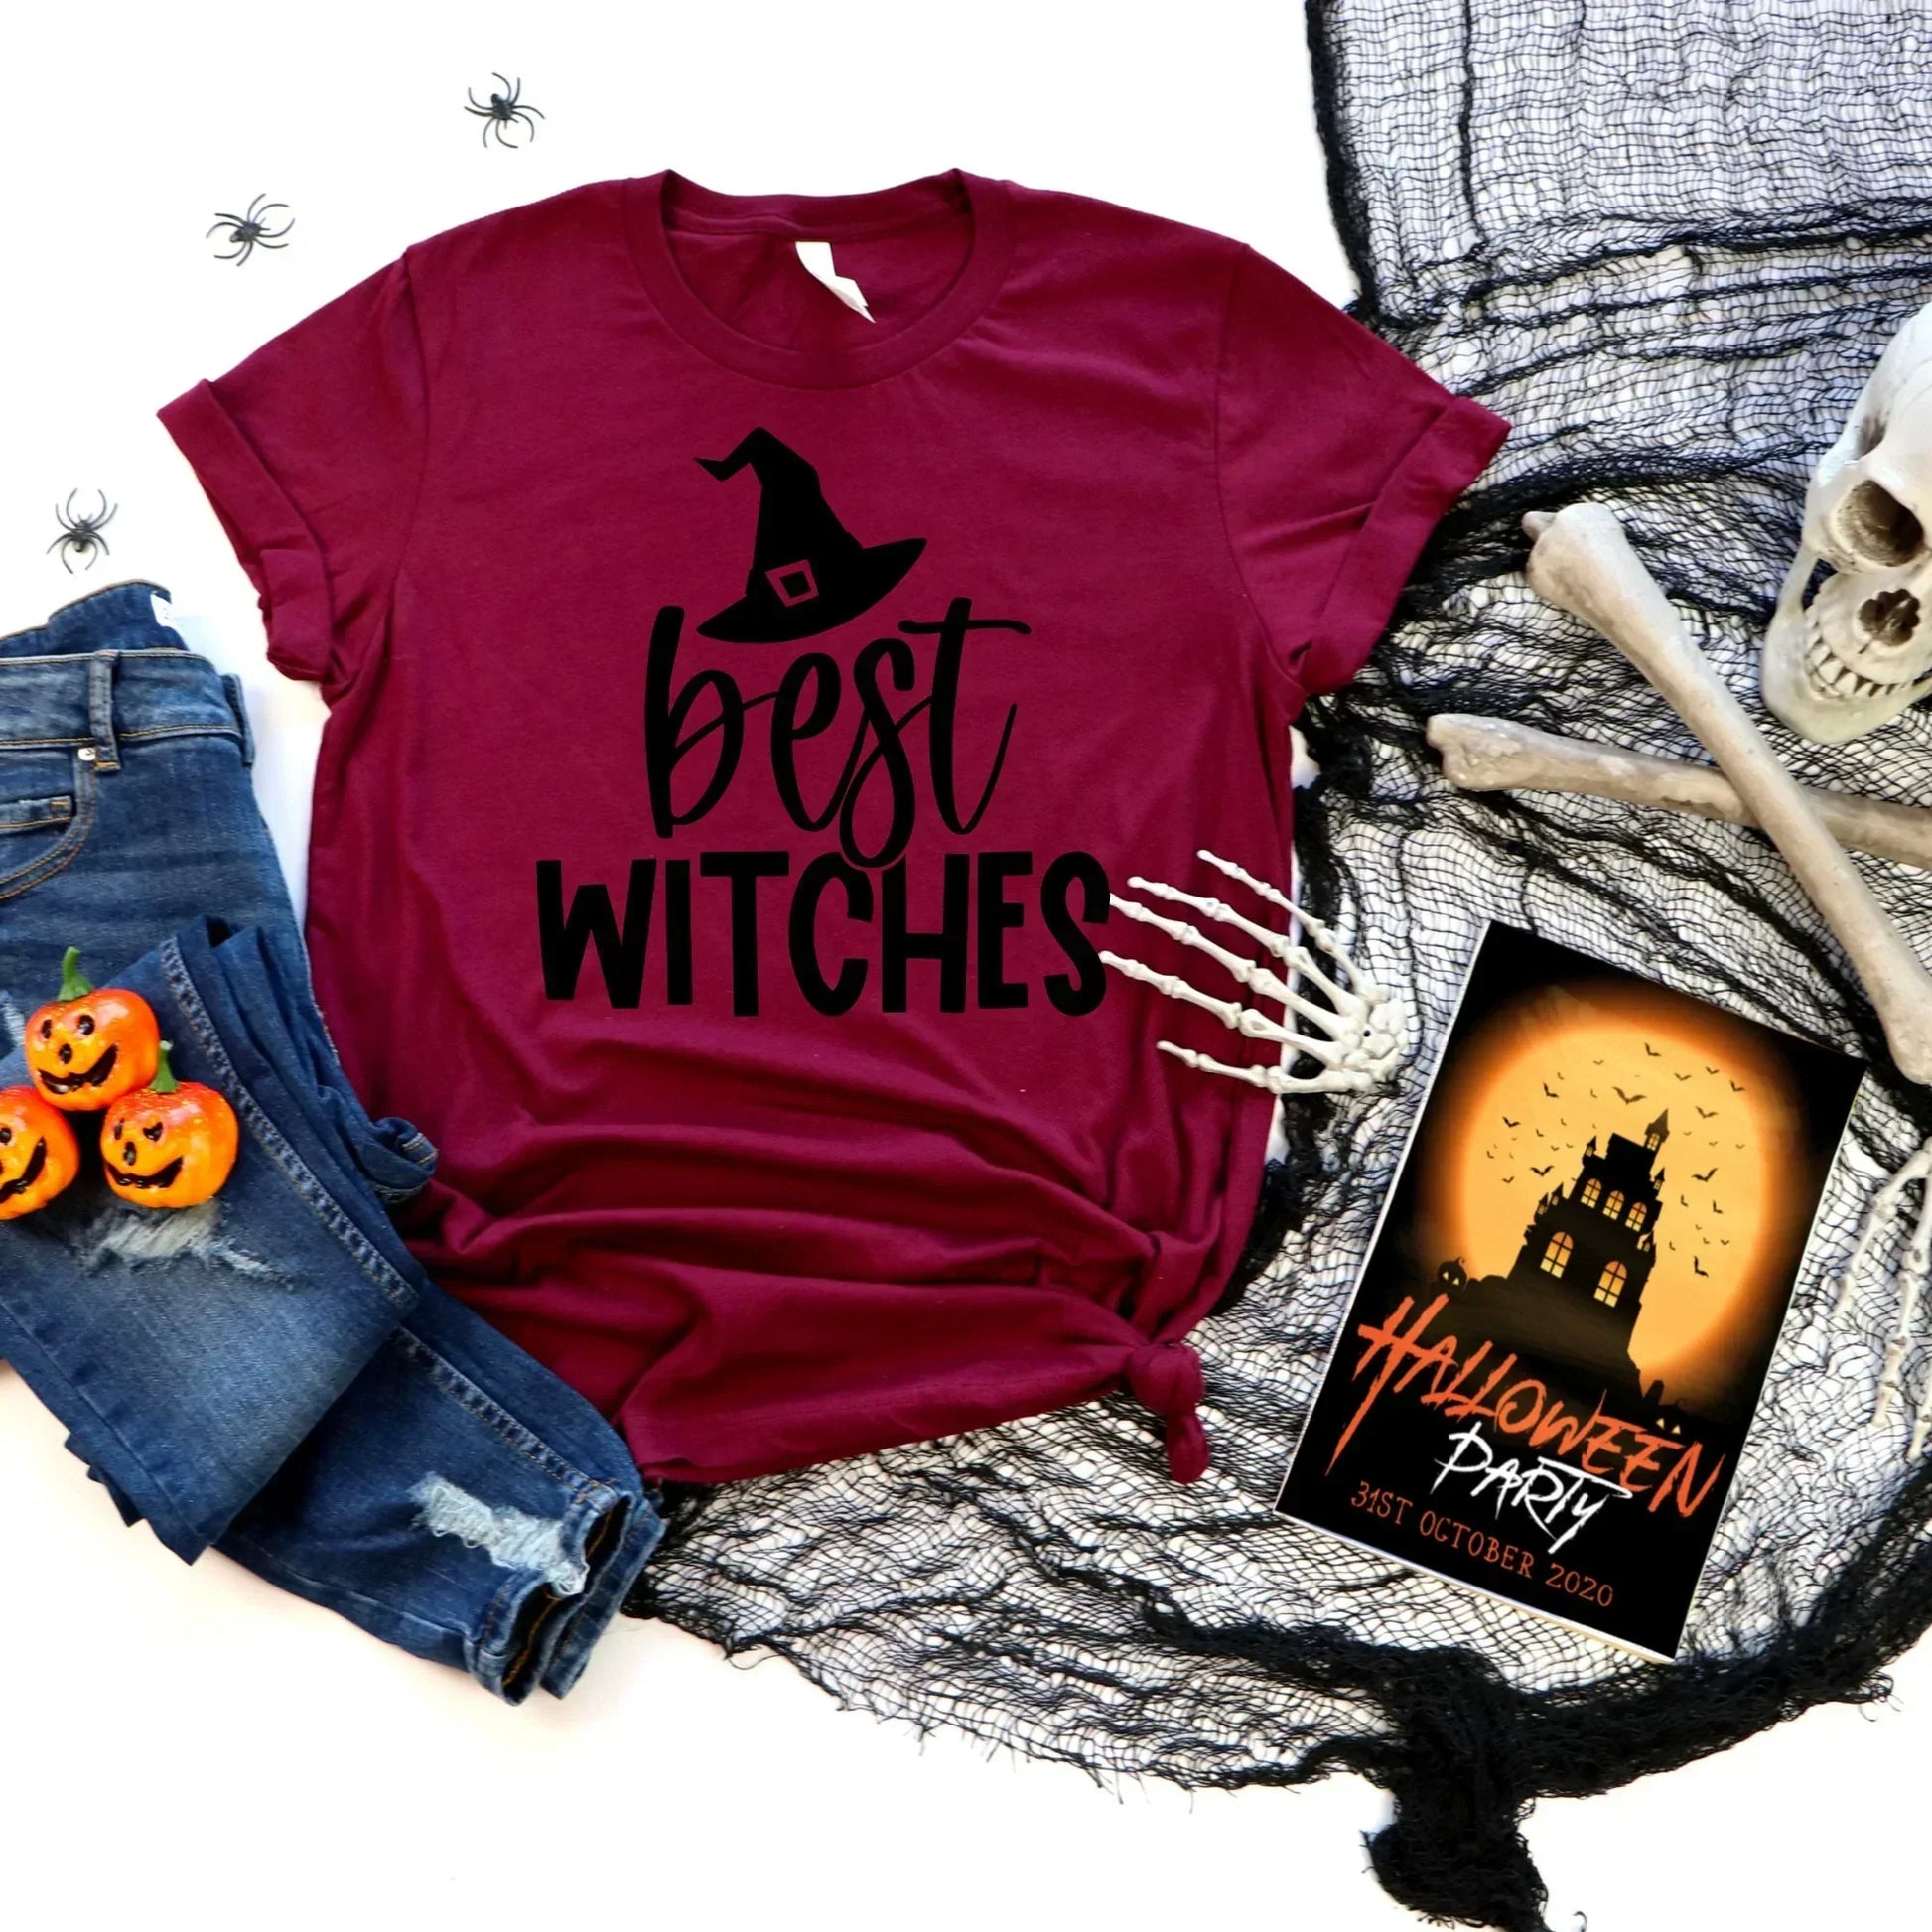 Best Witches Halloween Shirt for Friends